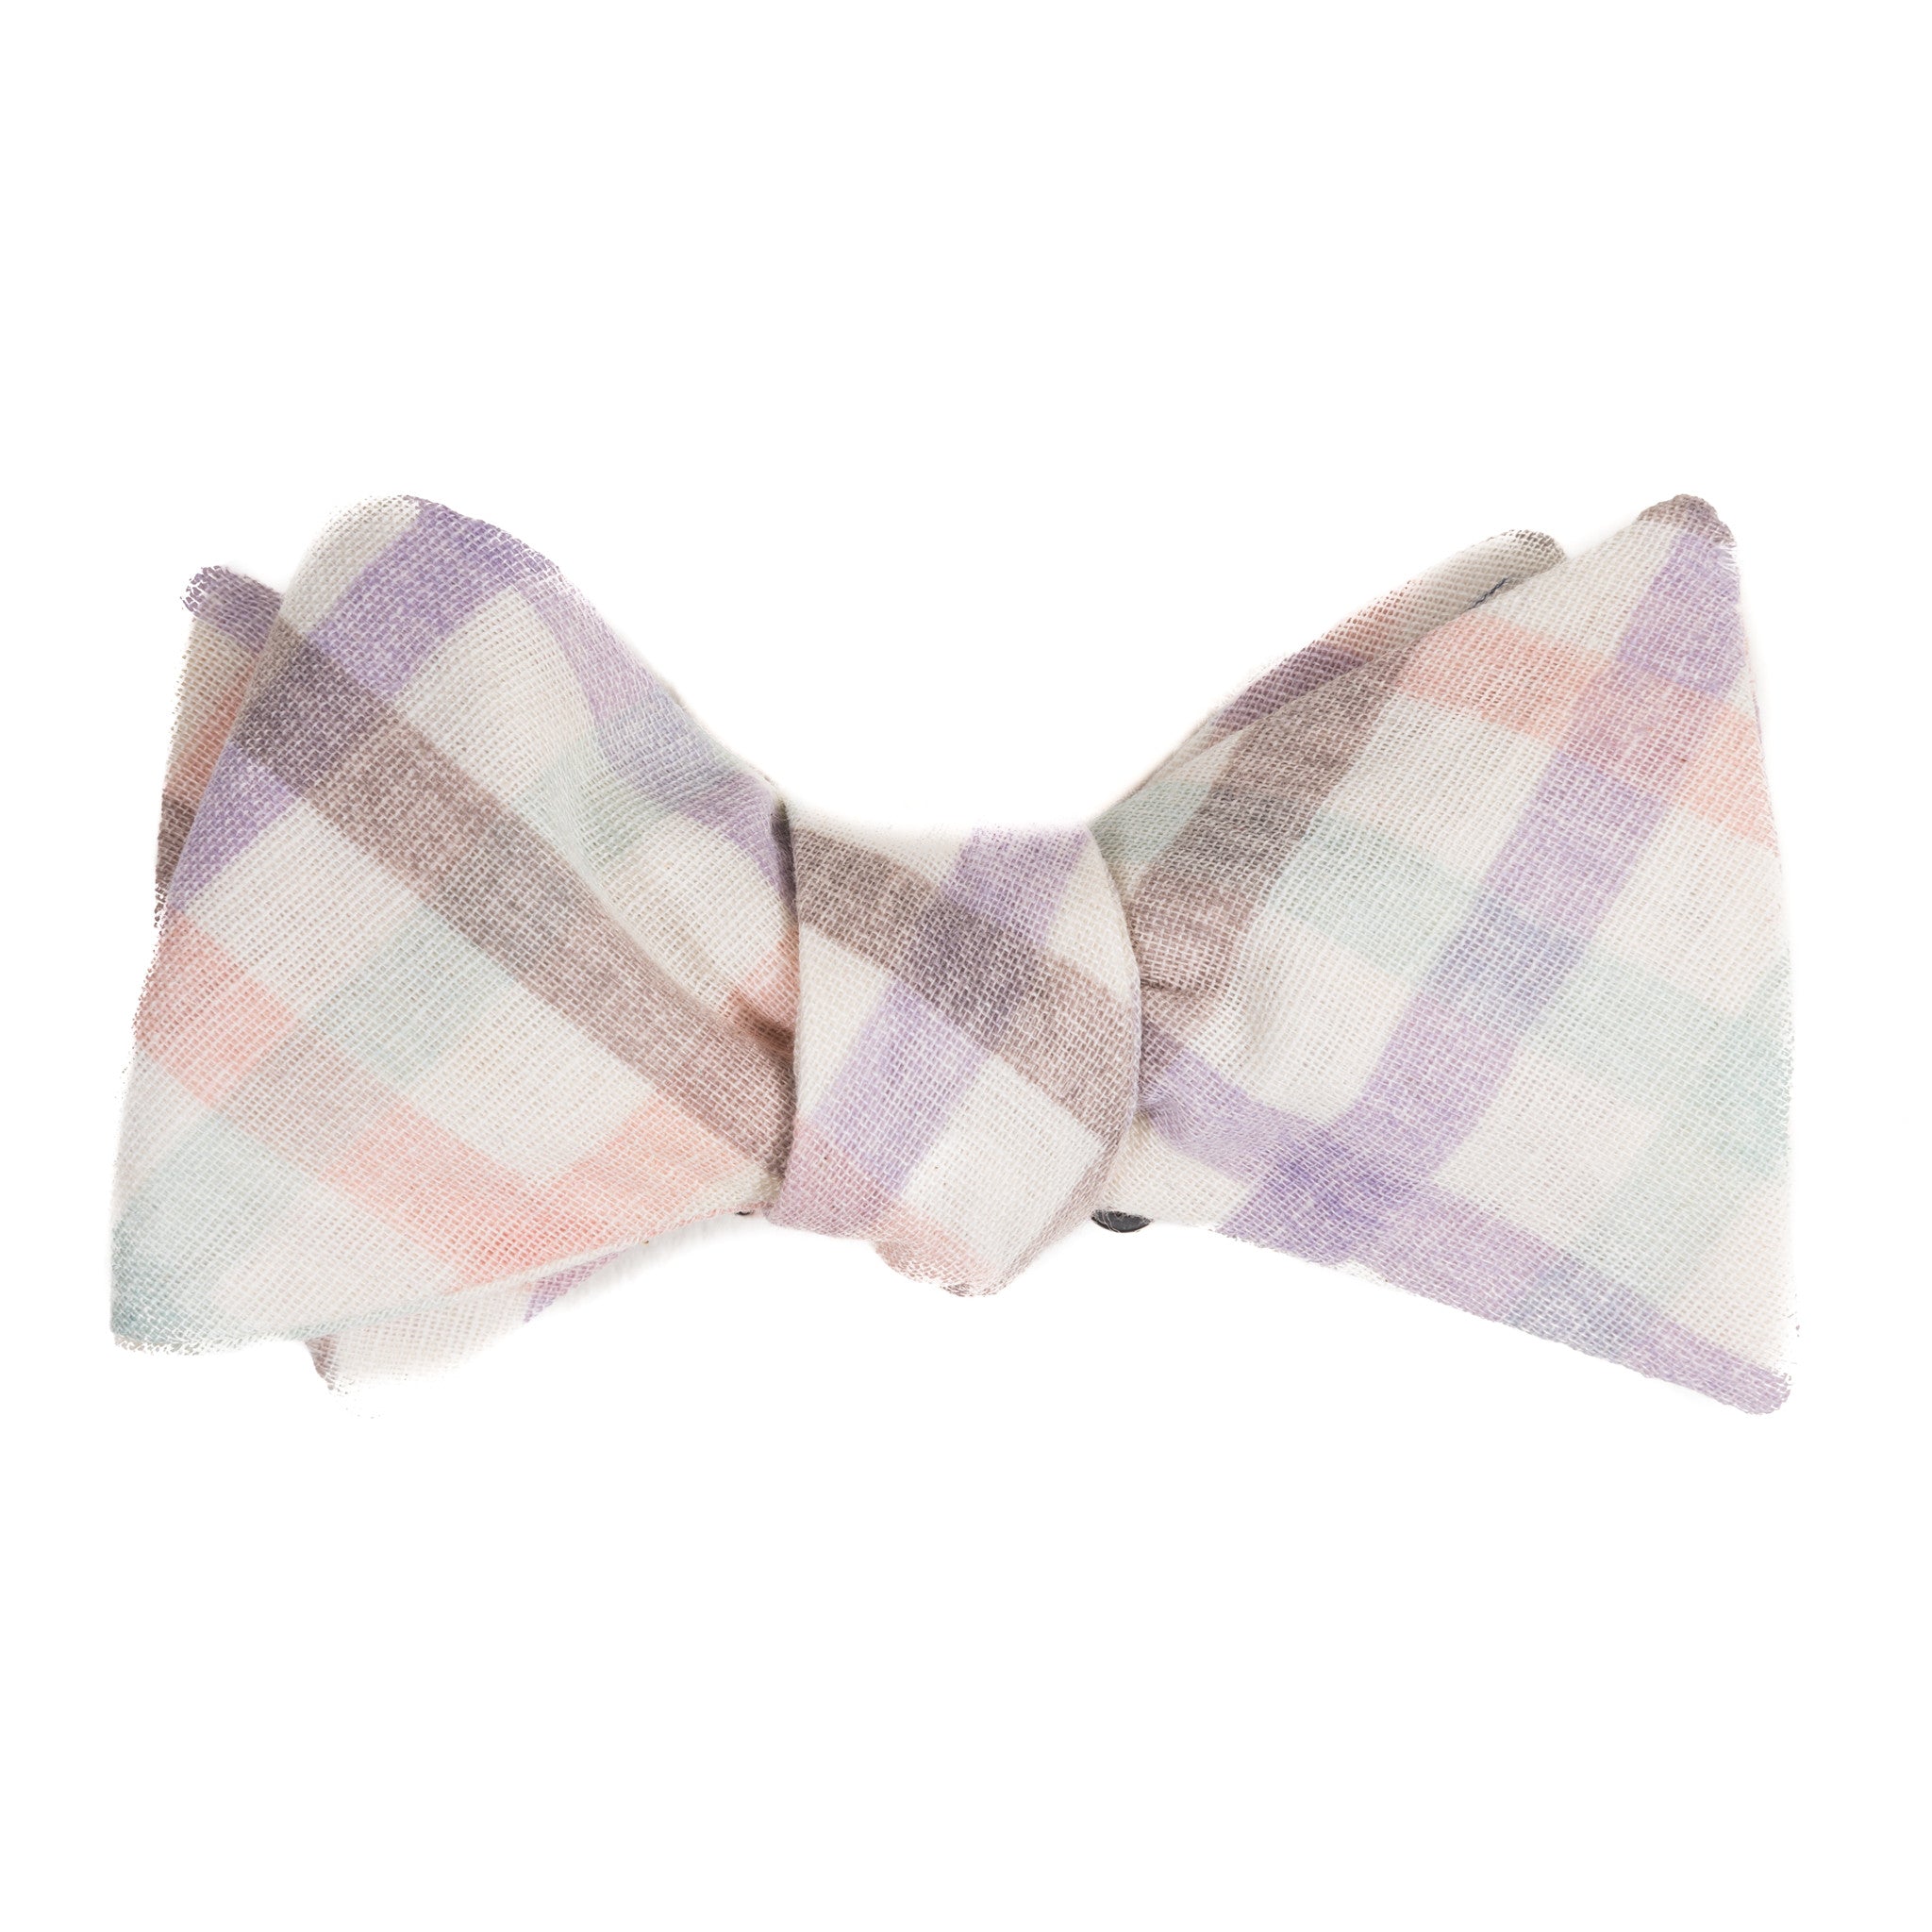 light purple, pink and green plaid bow tie from Mill City Fineries